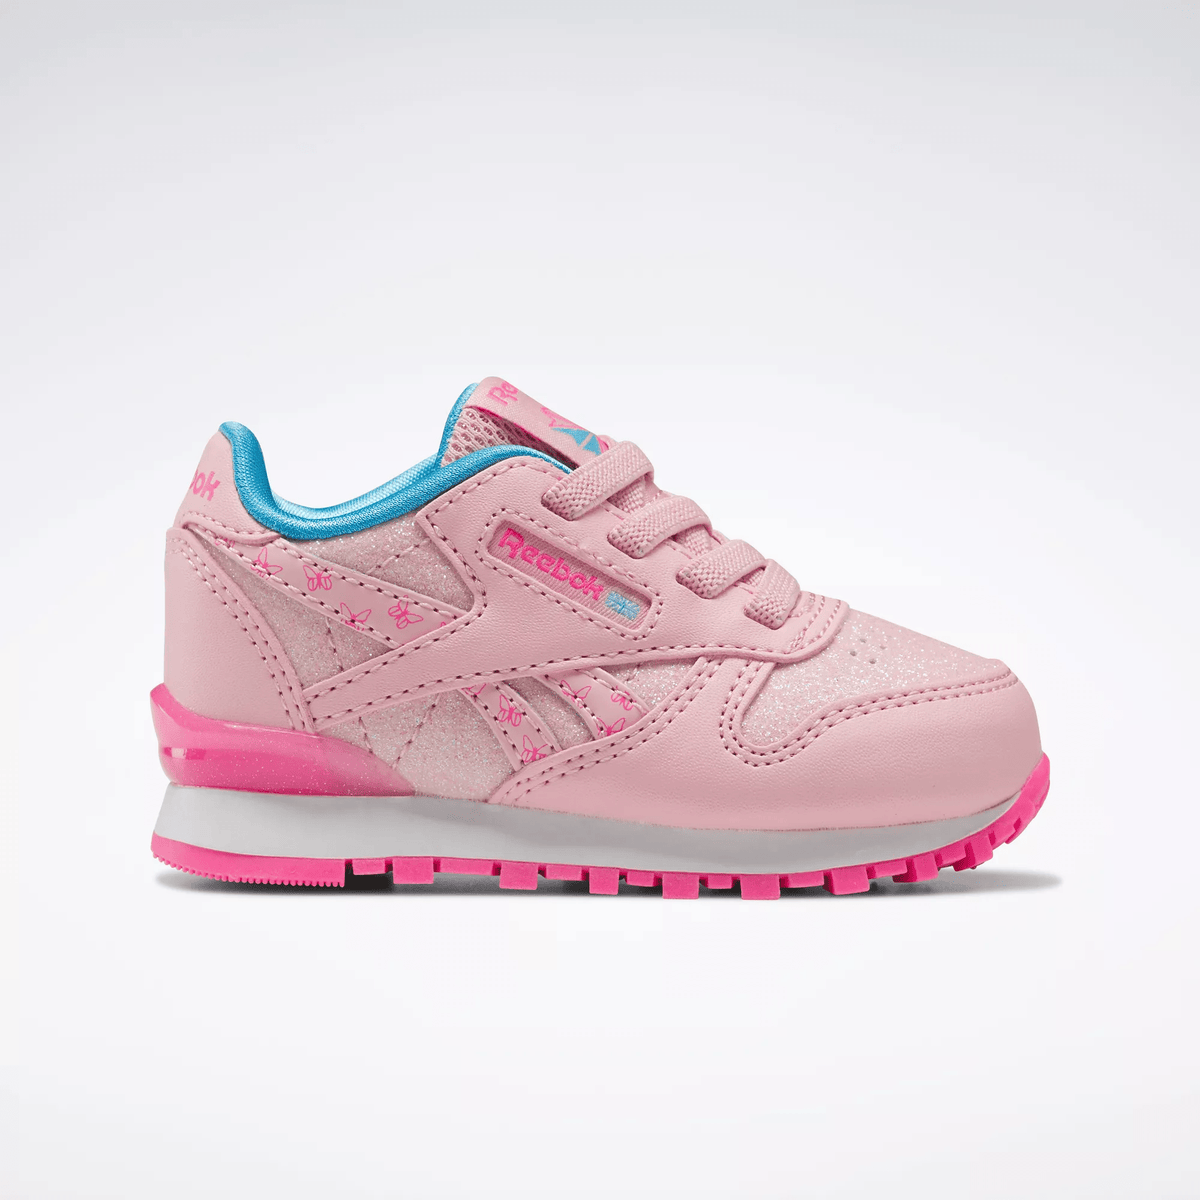 Reebok Women's Classic Leather Step 'n' Flash Shoes Pink